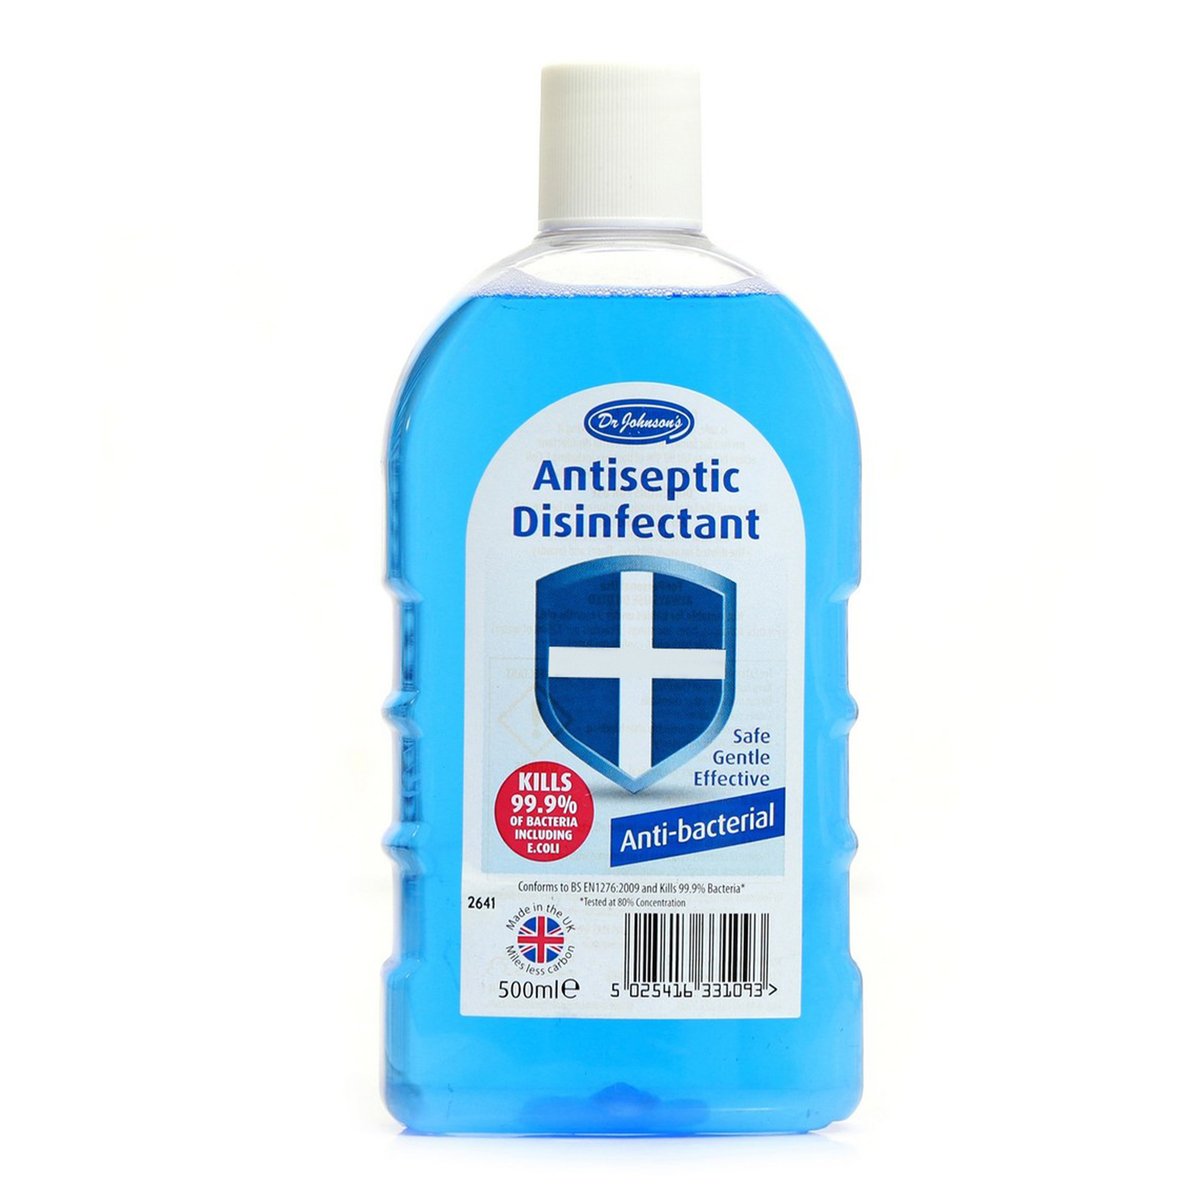 Dr. Johnson's Antiseptic Disinfectant Anti-Bacterial 500 ml